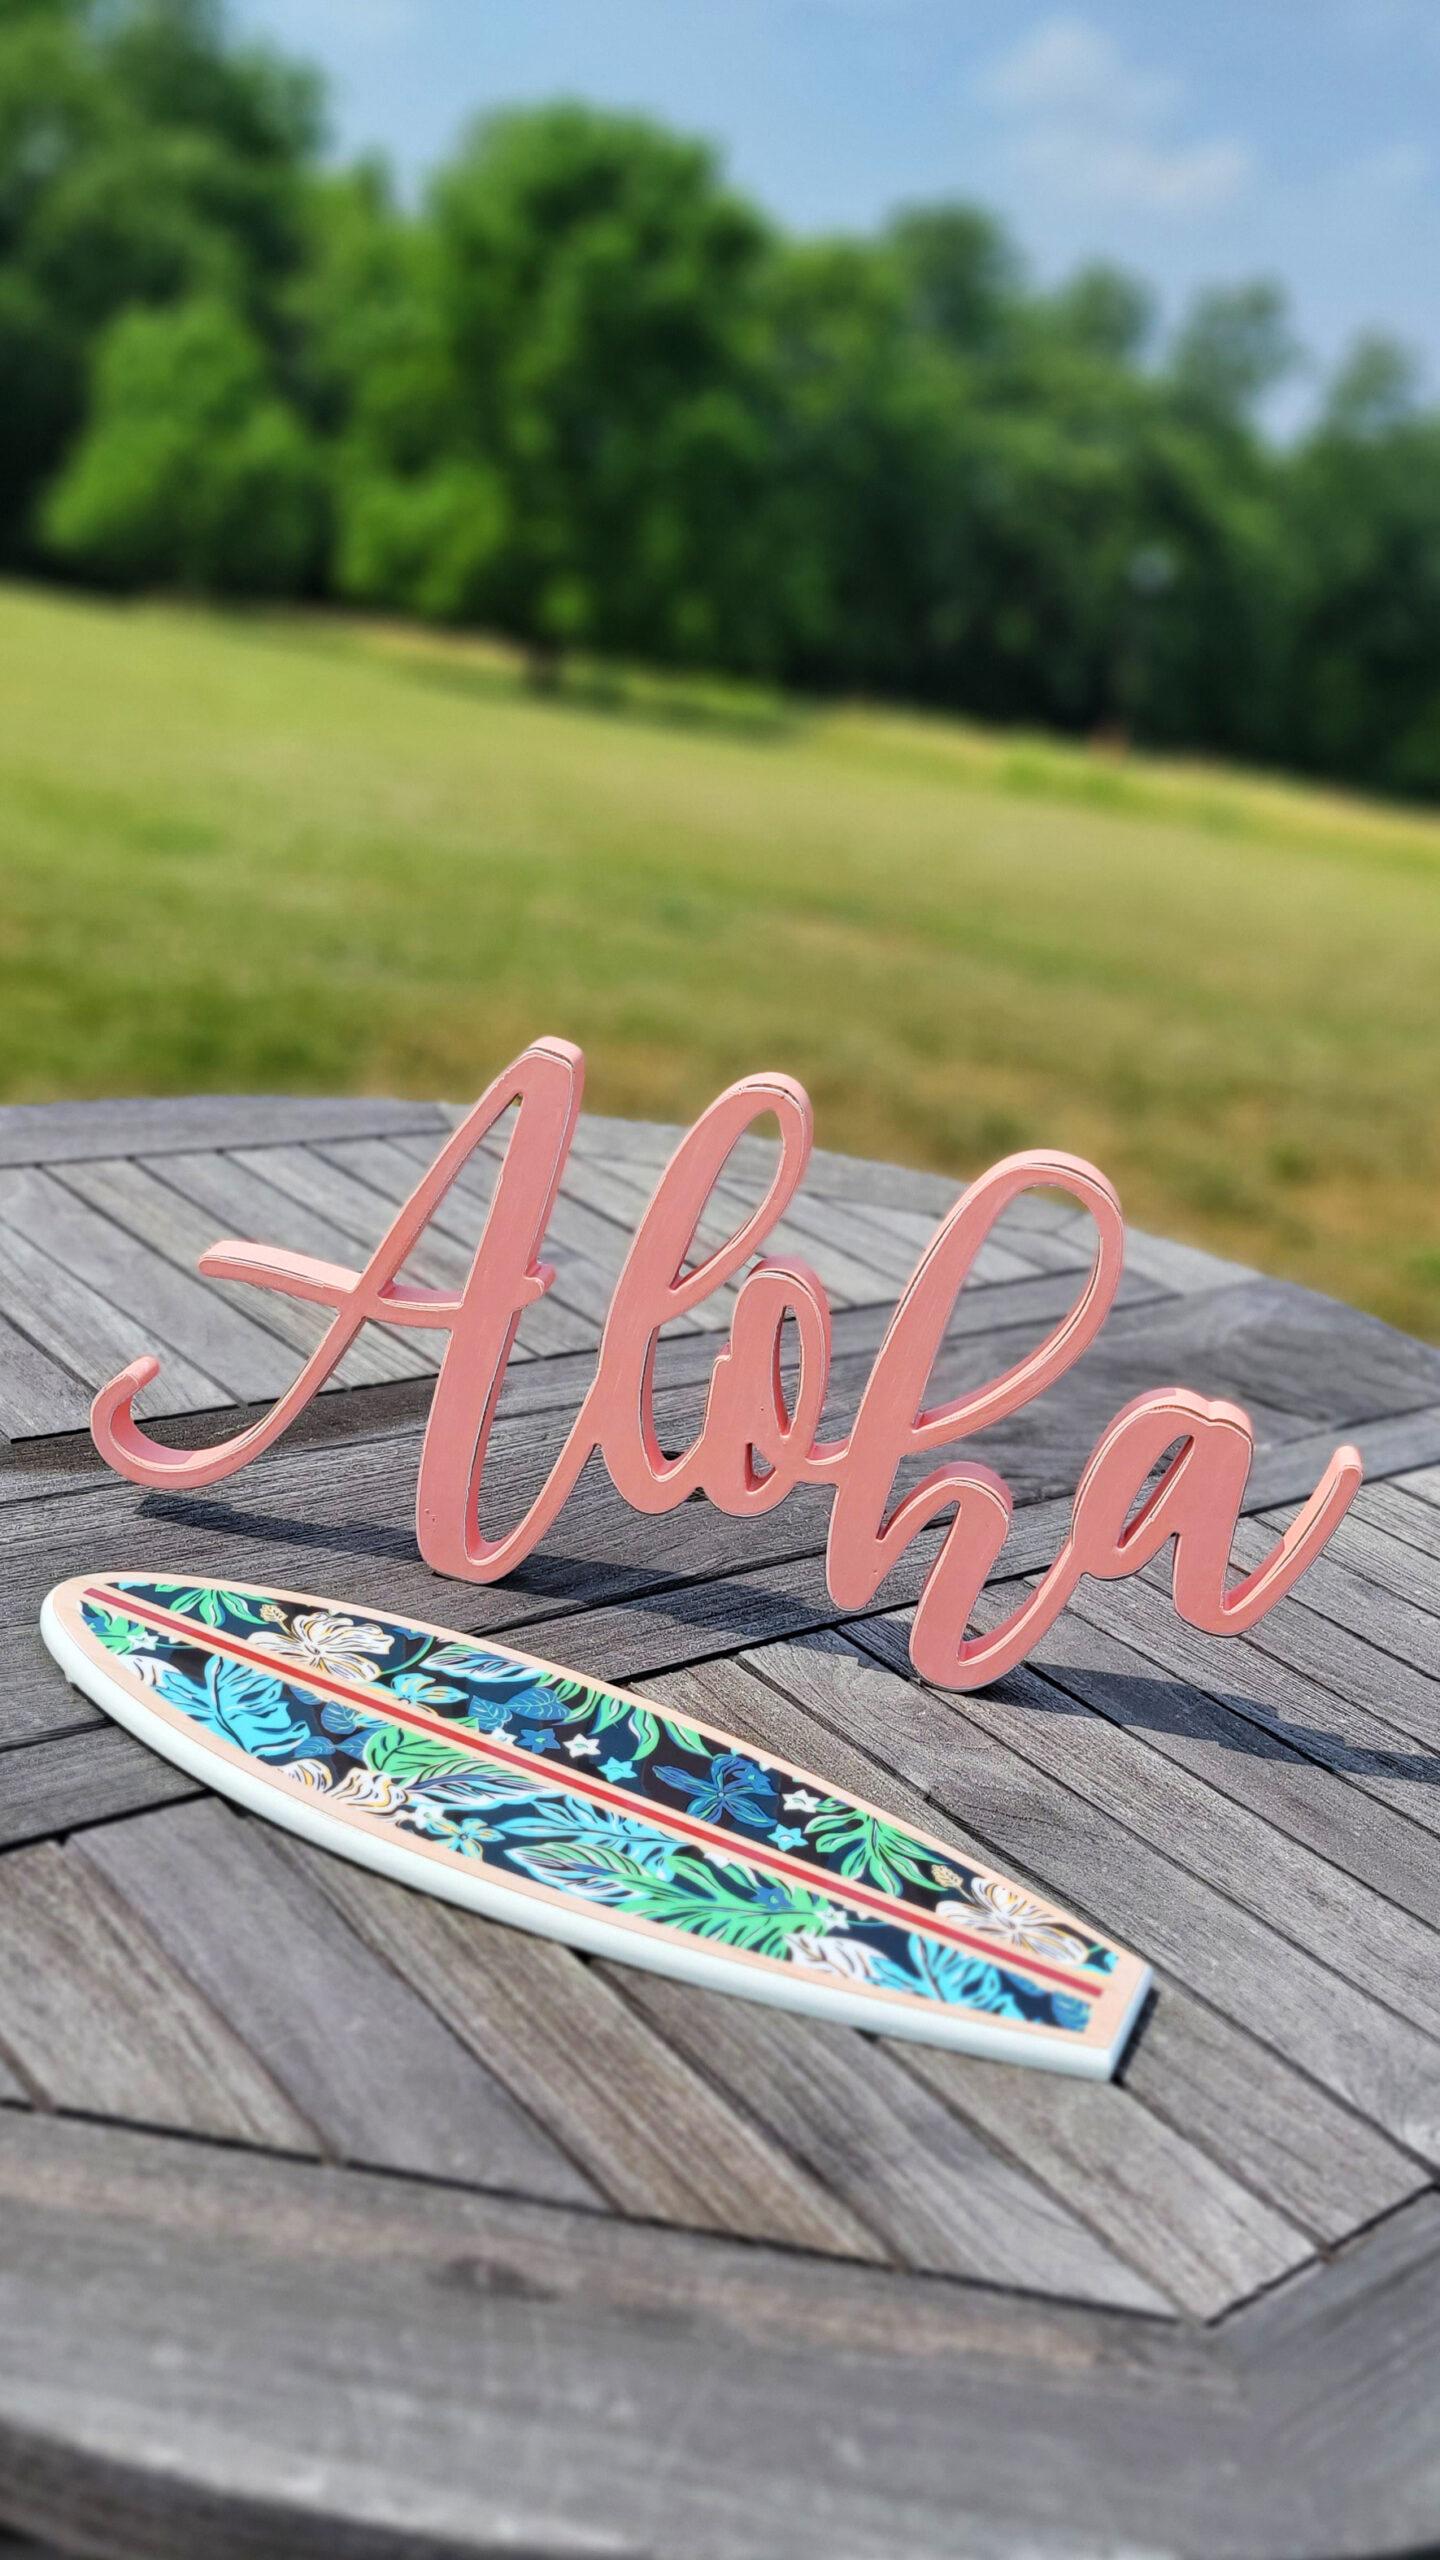 sample prop for Sky Blue Media's Summer Vibes promo service: Showing Pink "Aloha" script with pink decorative surf board 